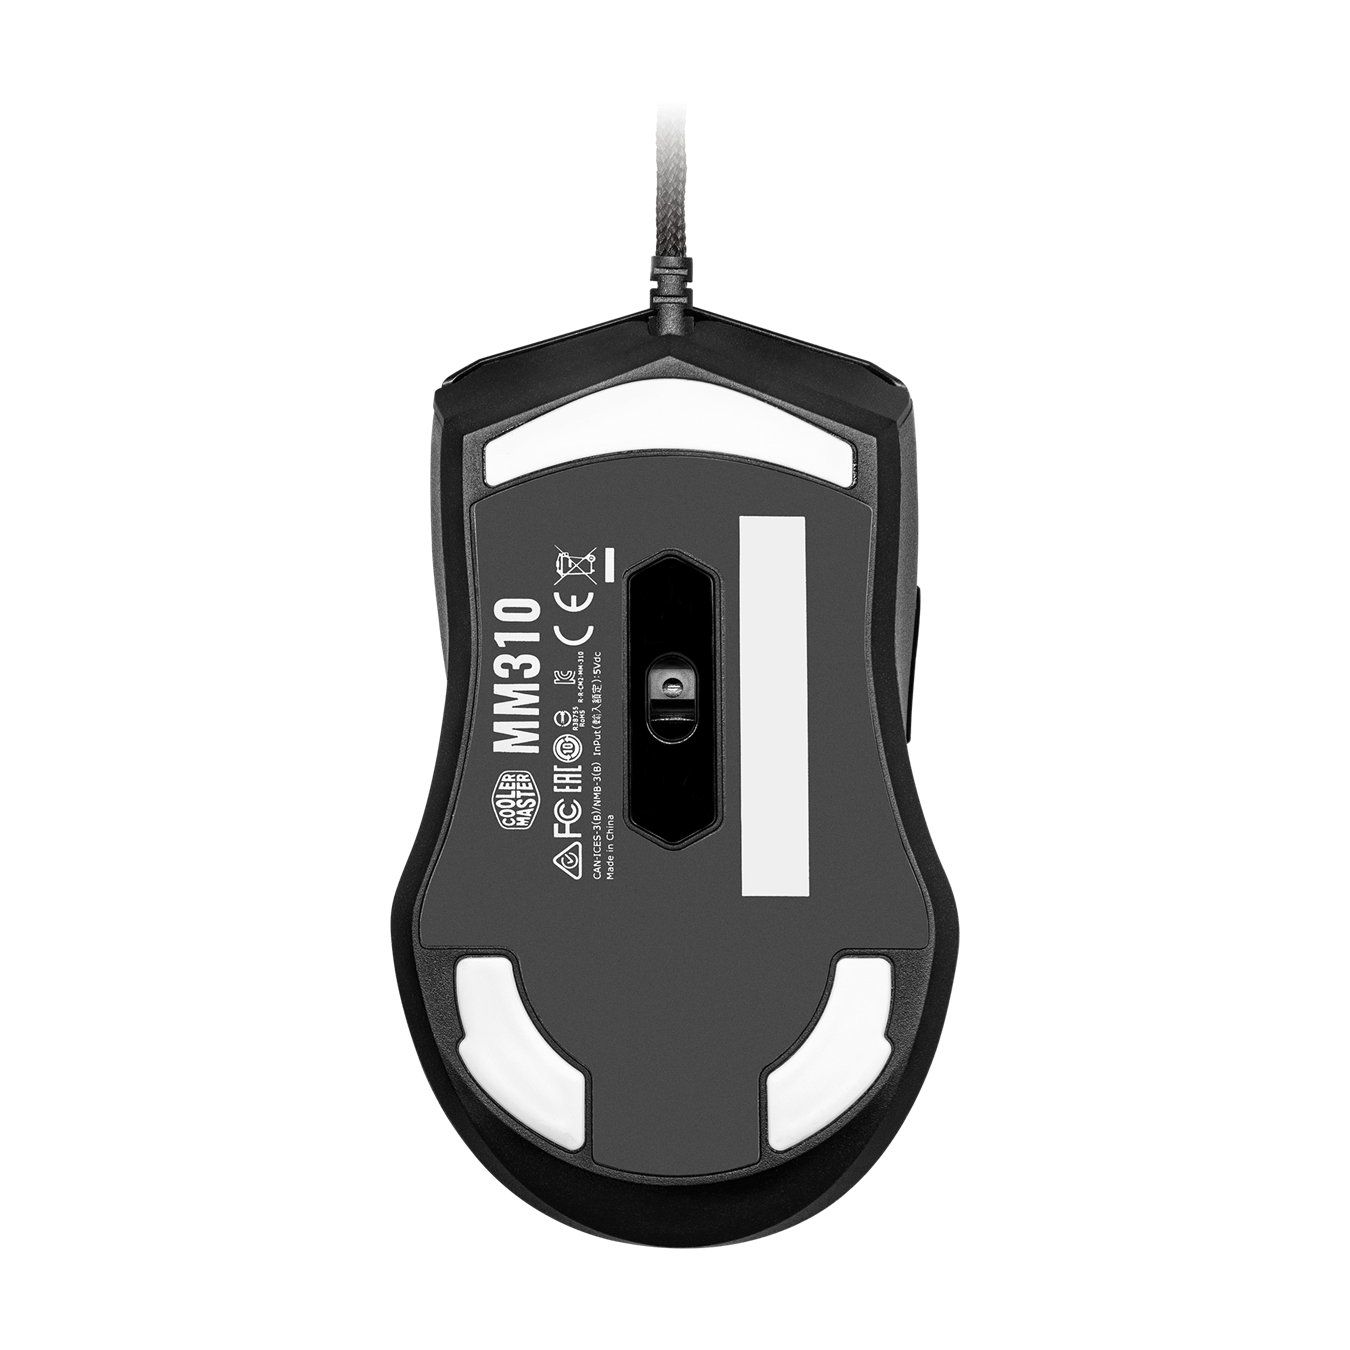 MM310 Gaming Mouse - New, improved software allows you to remap controls, customize your RGBs, tune your macros, and more